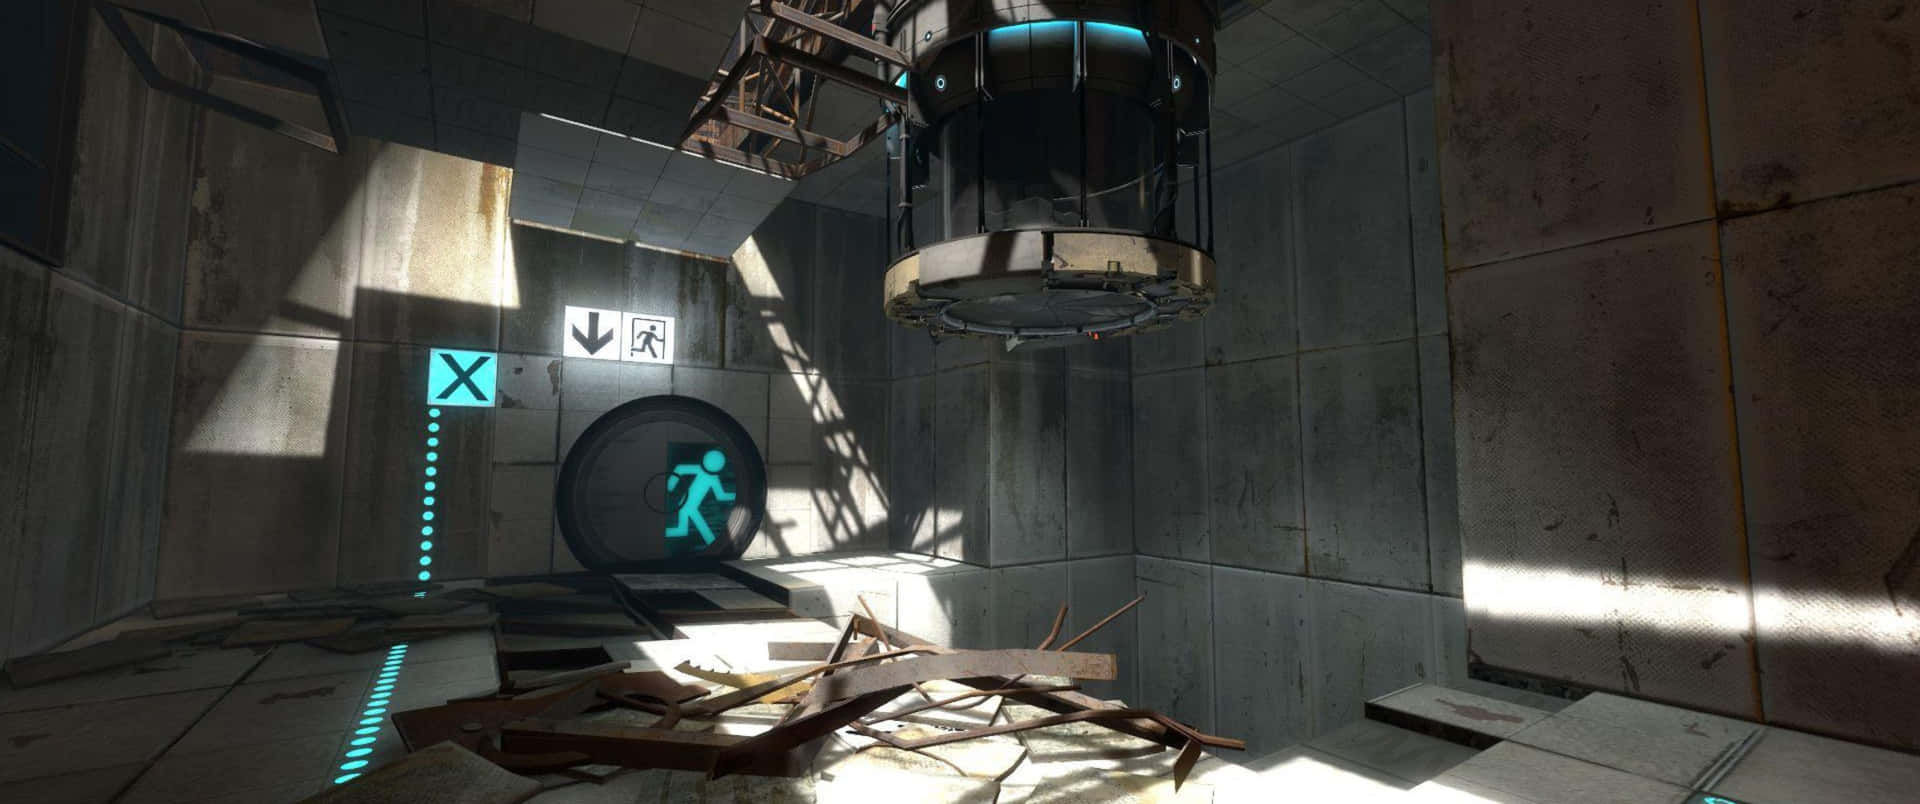 An Ace of Space - Play the classic video game Portal 2 in stunning 3440x1440p